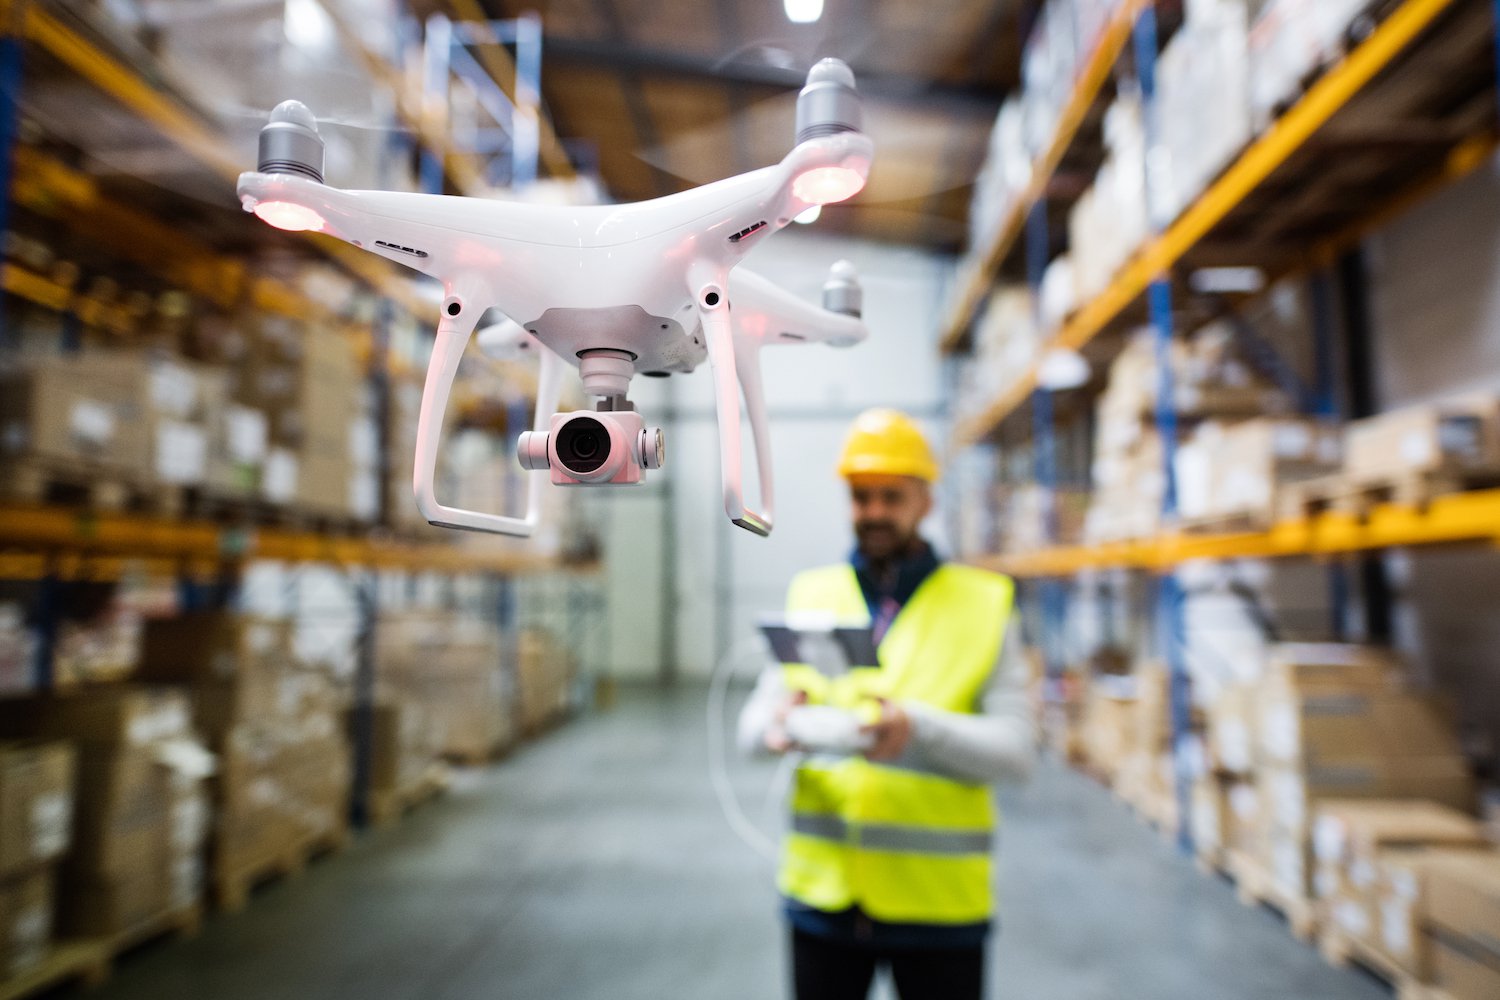 Walmart Explores Blockchain For Connecting Automated Delivery Drones